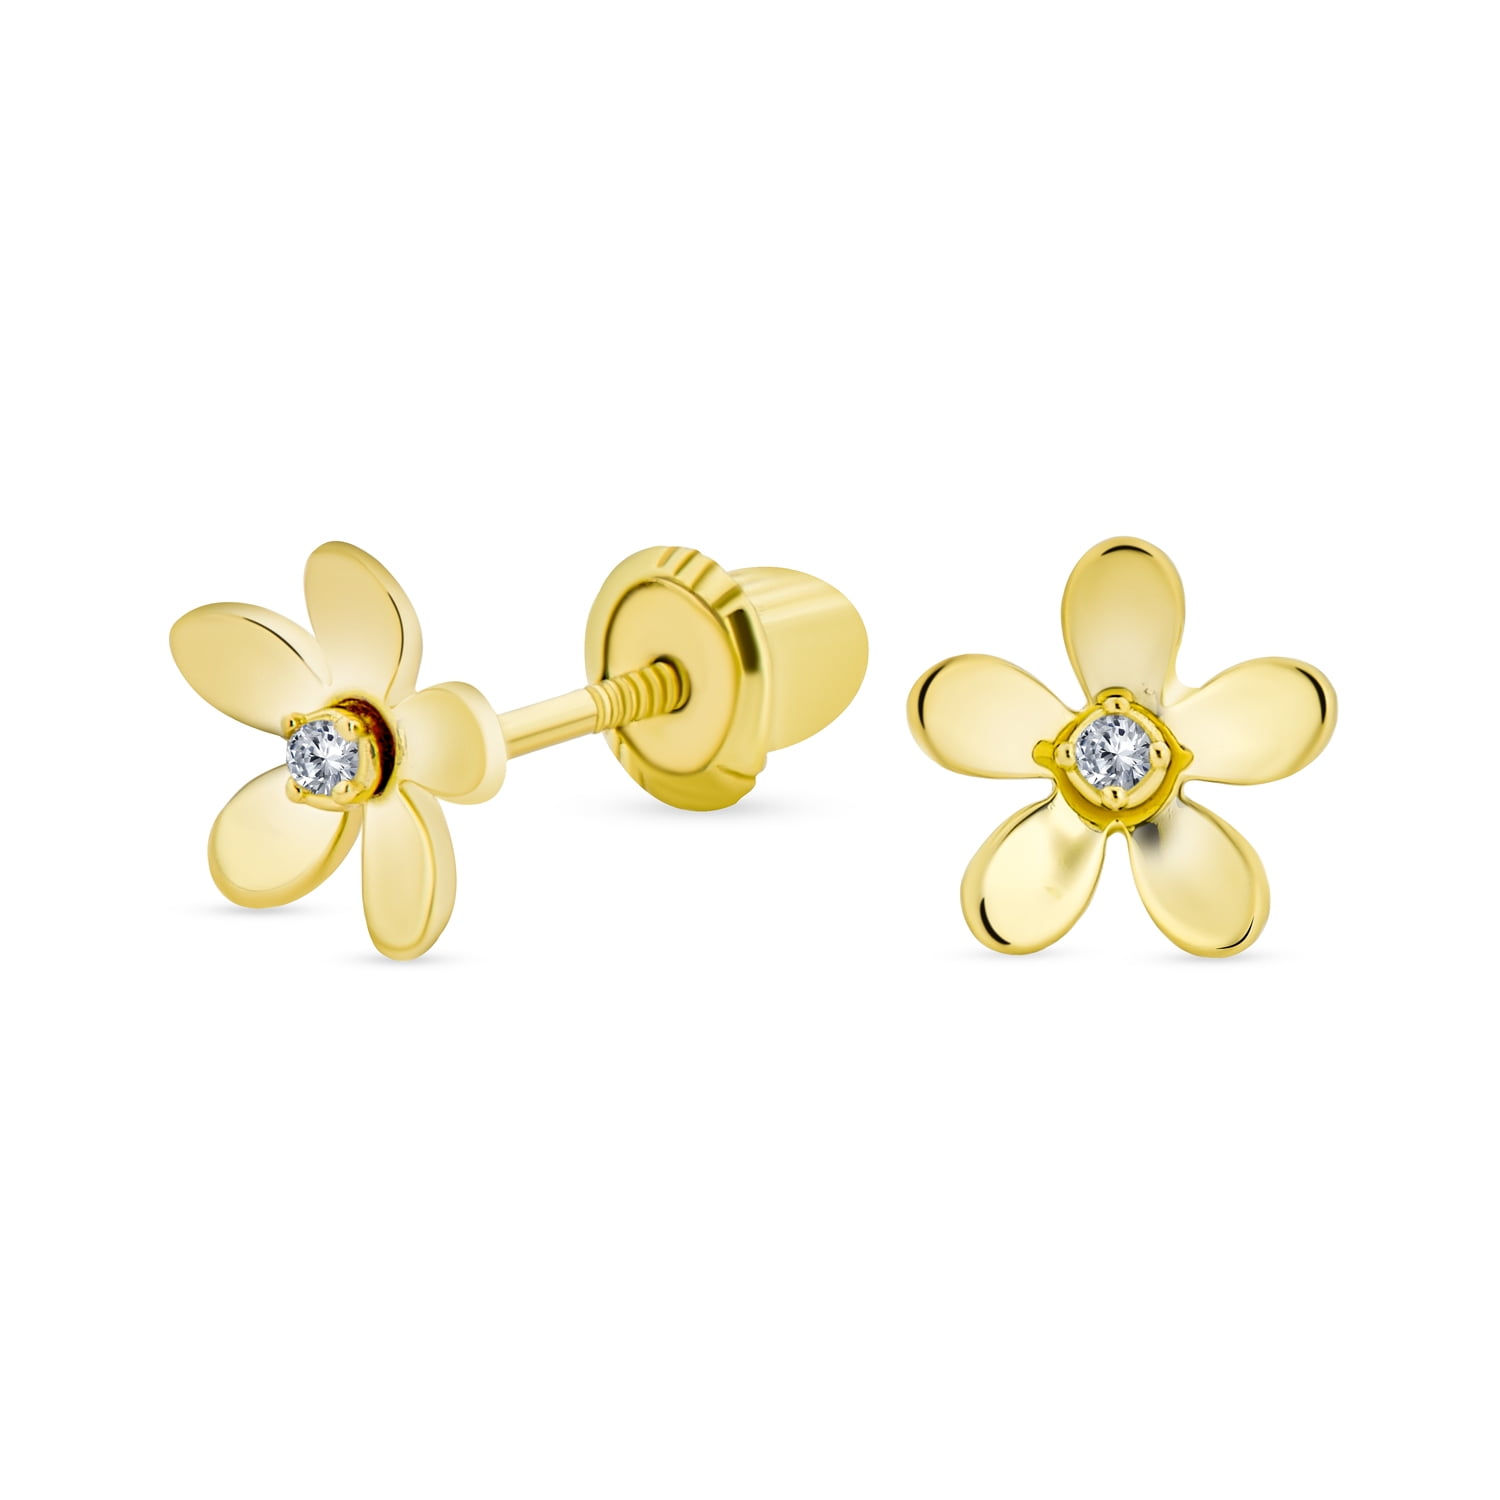 Daisy Studs | Neutral Marble Statement Earrings / Clay Earrings | Pink  Yellow White Speckled Flower Studs